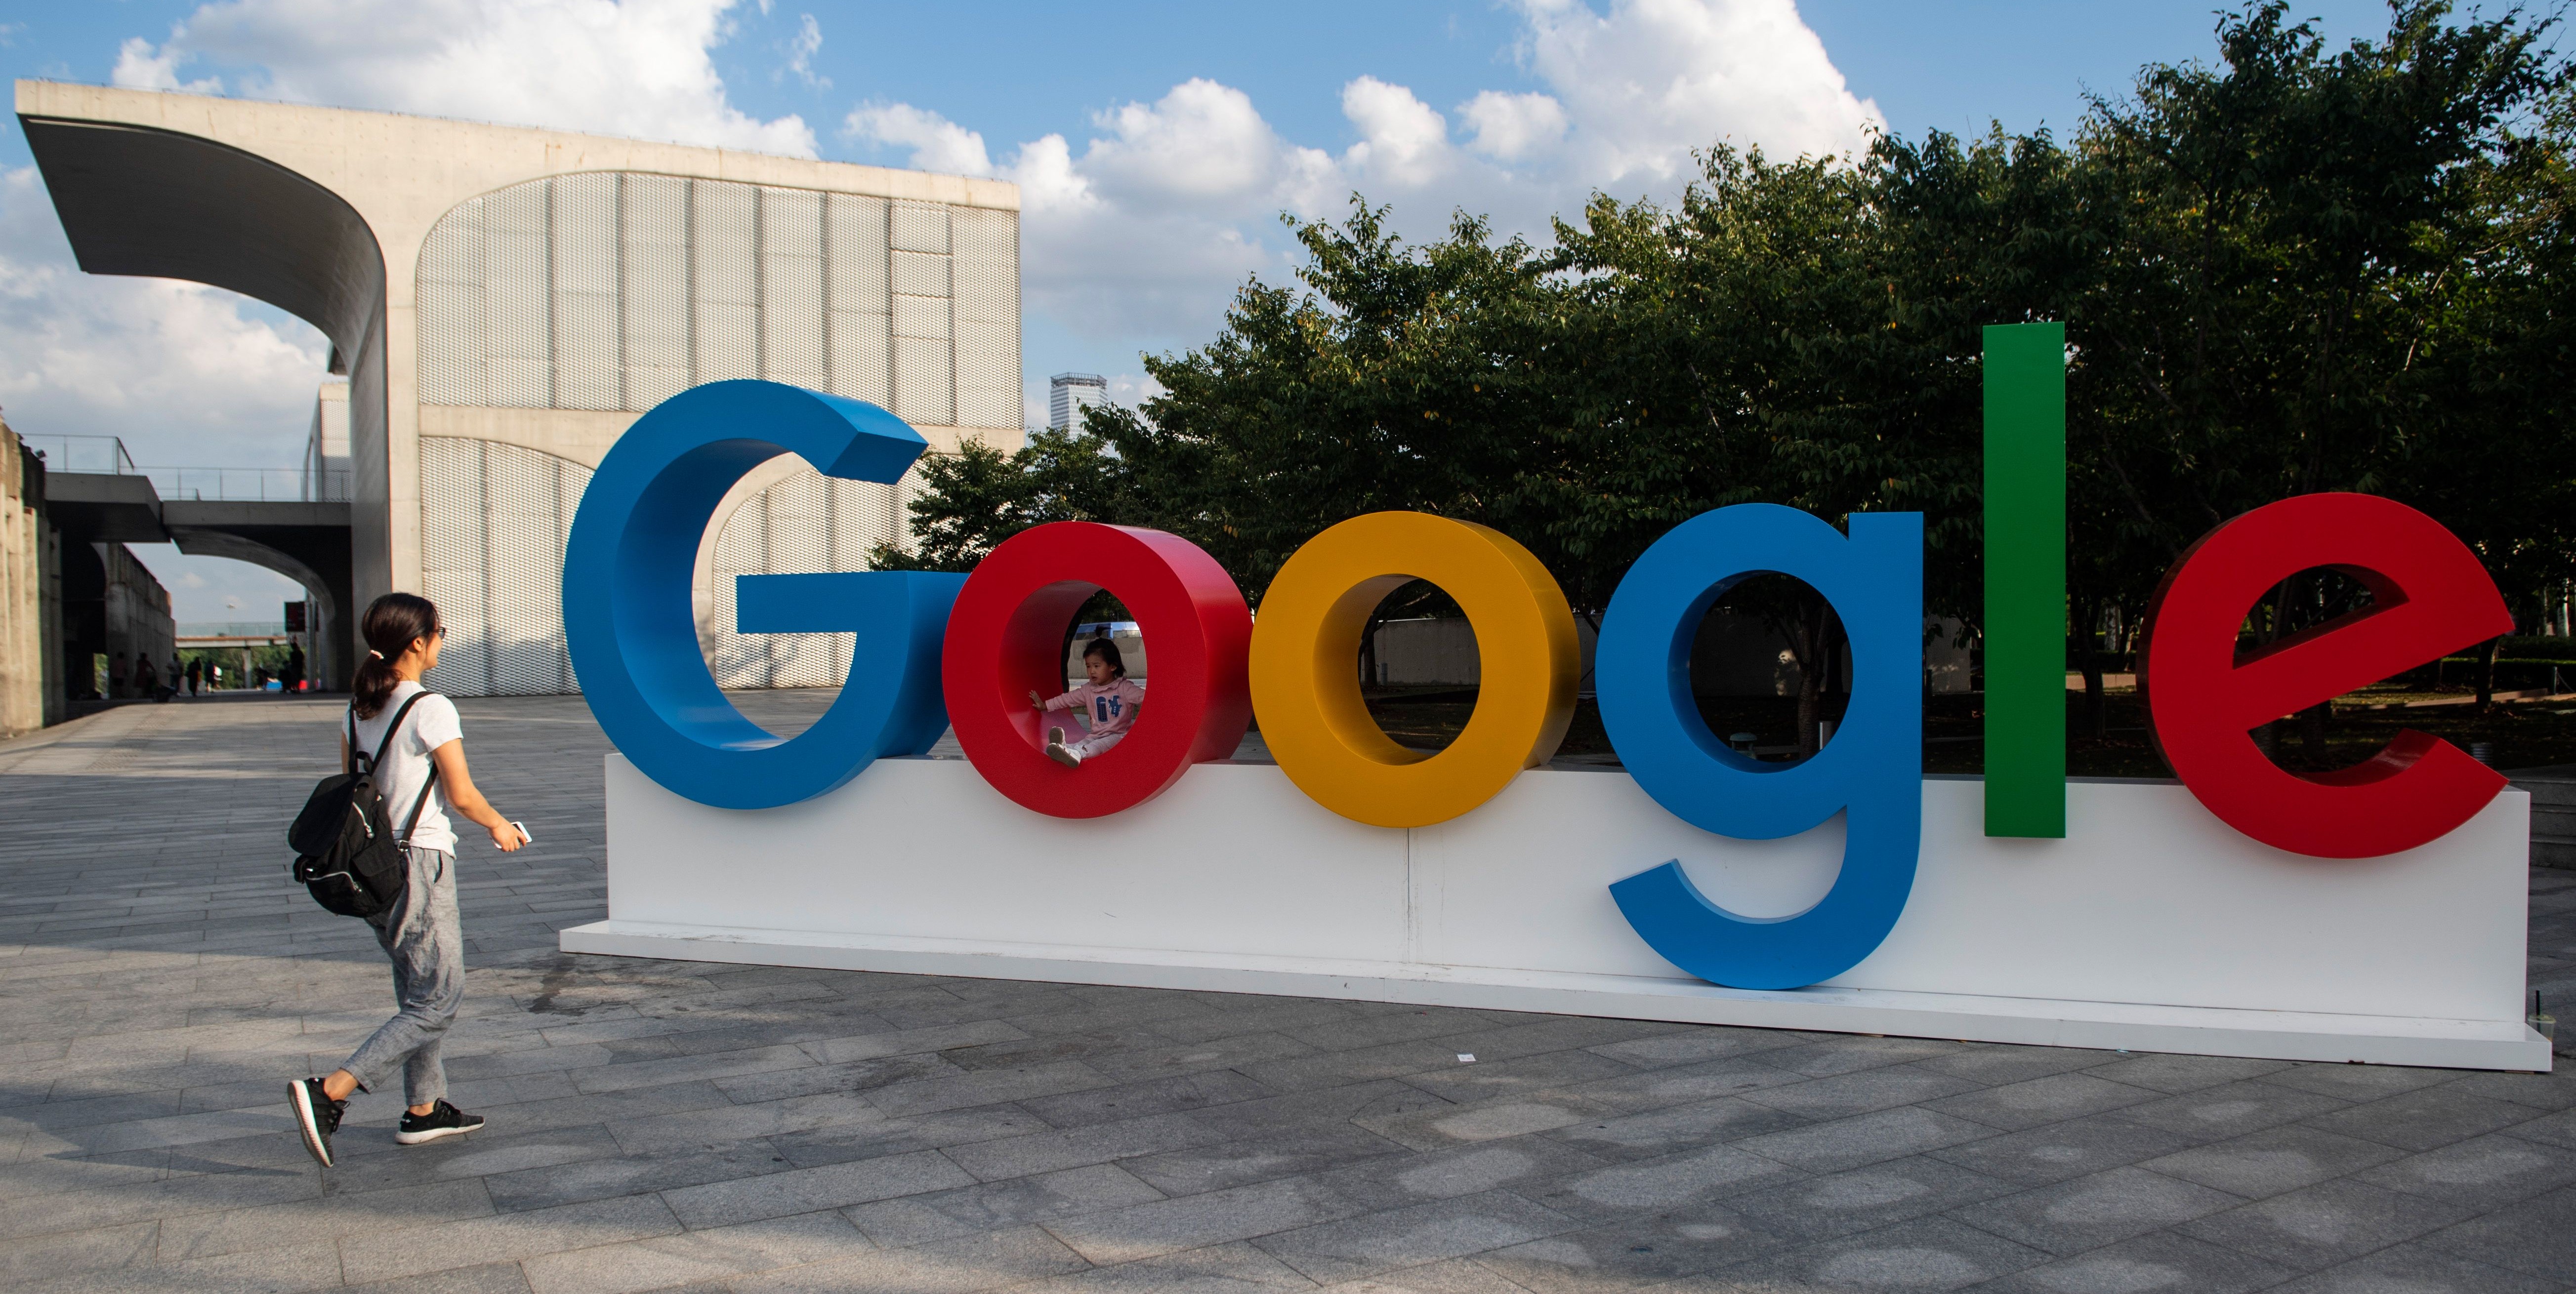 A woman and her child play on a Google sign at the World Artificial Intelligence Conference (WAIC) in Shanghai on September 26, 2018. (Photo by Johannes EISELE / AFP)        (Photo credit should read JOHANNES EISELE/AFP/Getty Images)